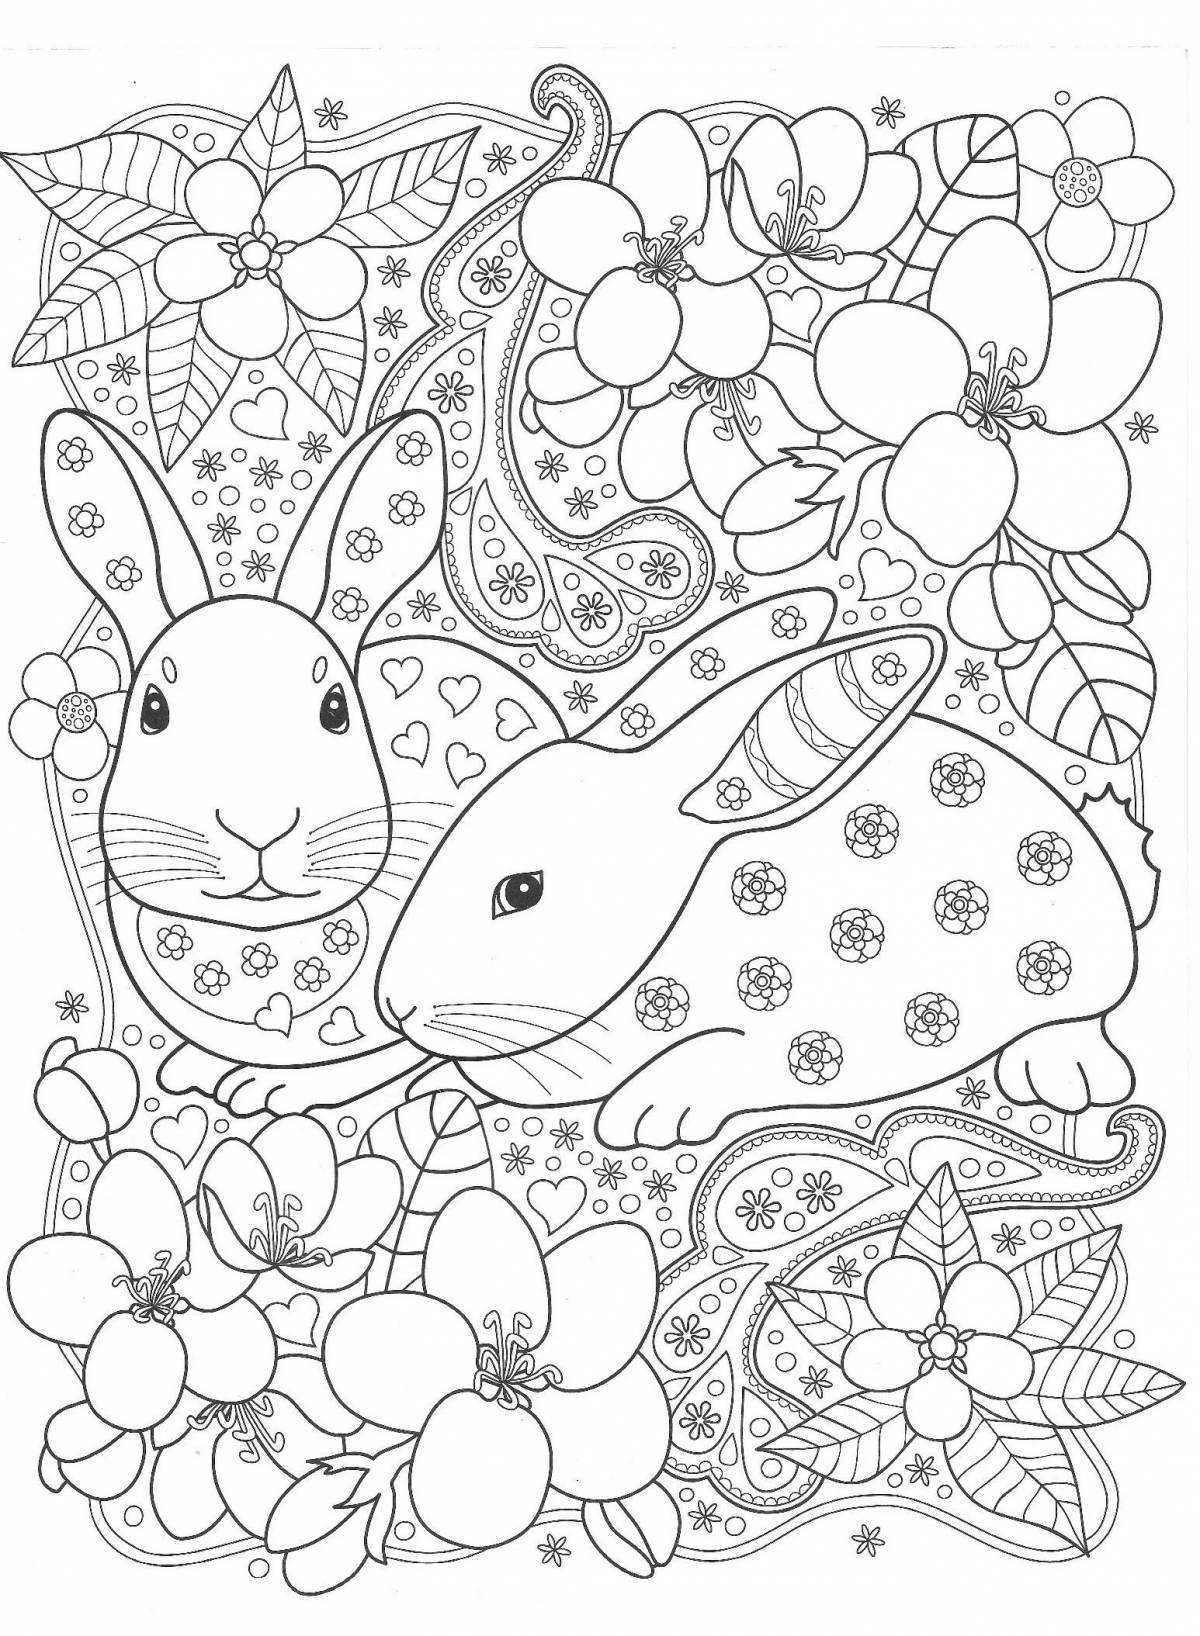 Serene anti-stress coloring book for girls